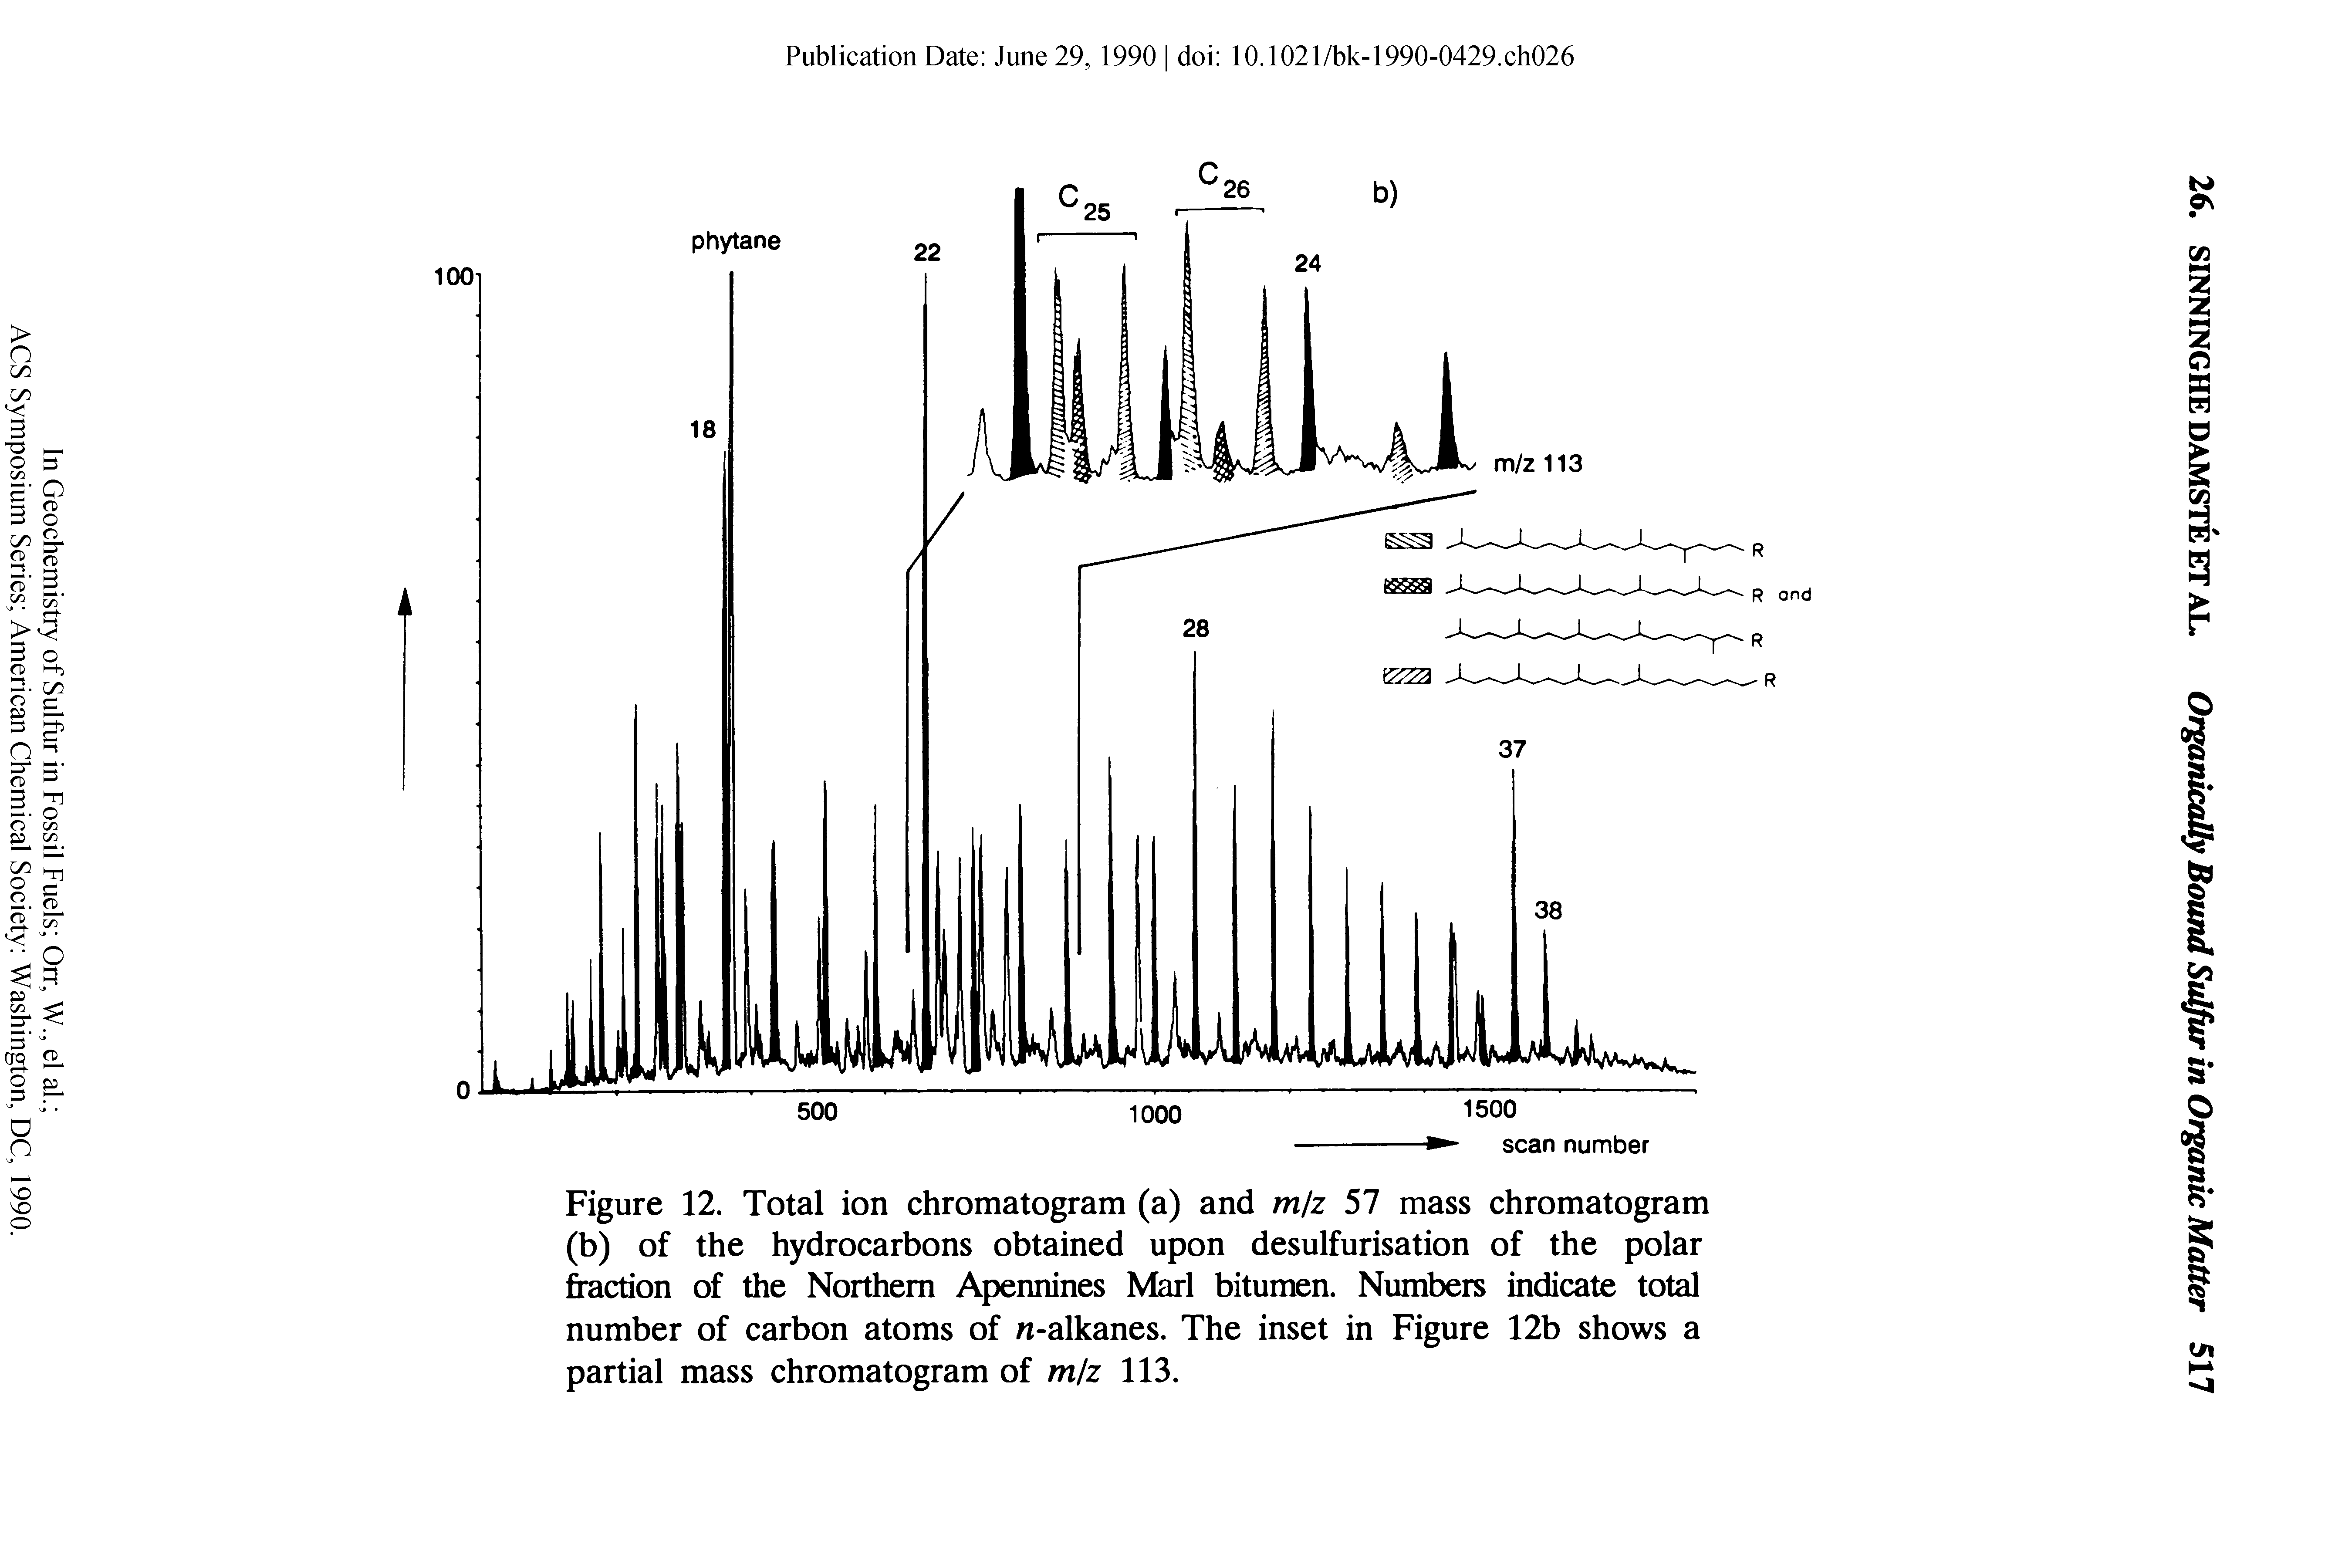 Figure 12. Total ion chromatogram (a) and m/z 57 mass chromatogram (b) of the hydrocarbons obtained upon desulfurisation of the polar fraction of the Northern Apennines Marl bitumen. Numbers indicate total number of carbon atoms of n-alkanes. The inset in Figure 12b shows a partial mass chromatogram of m/z 113.